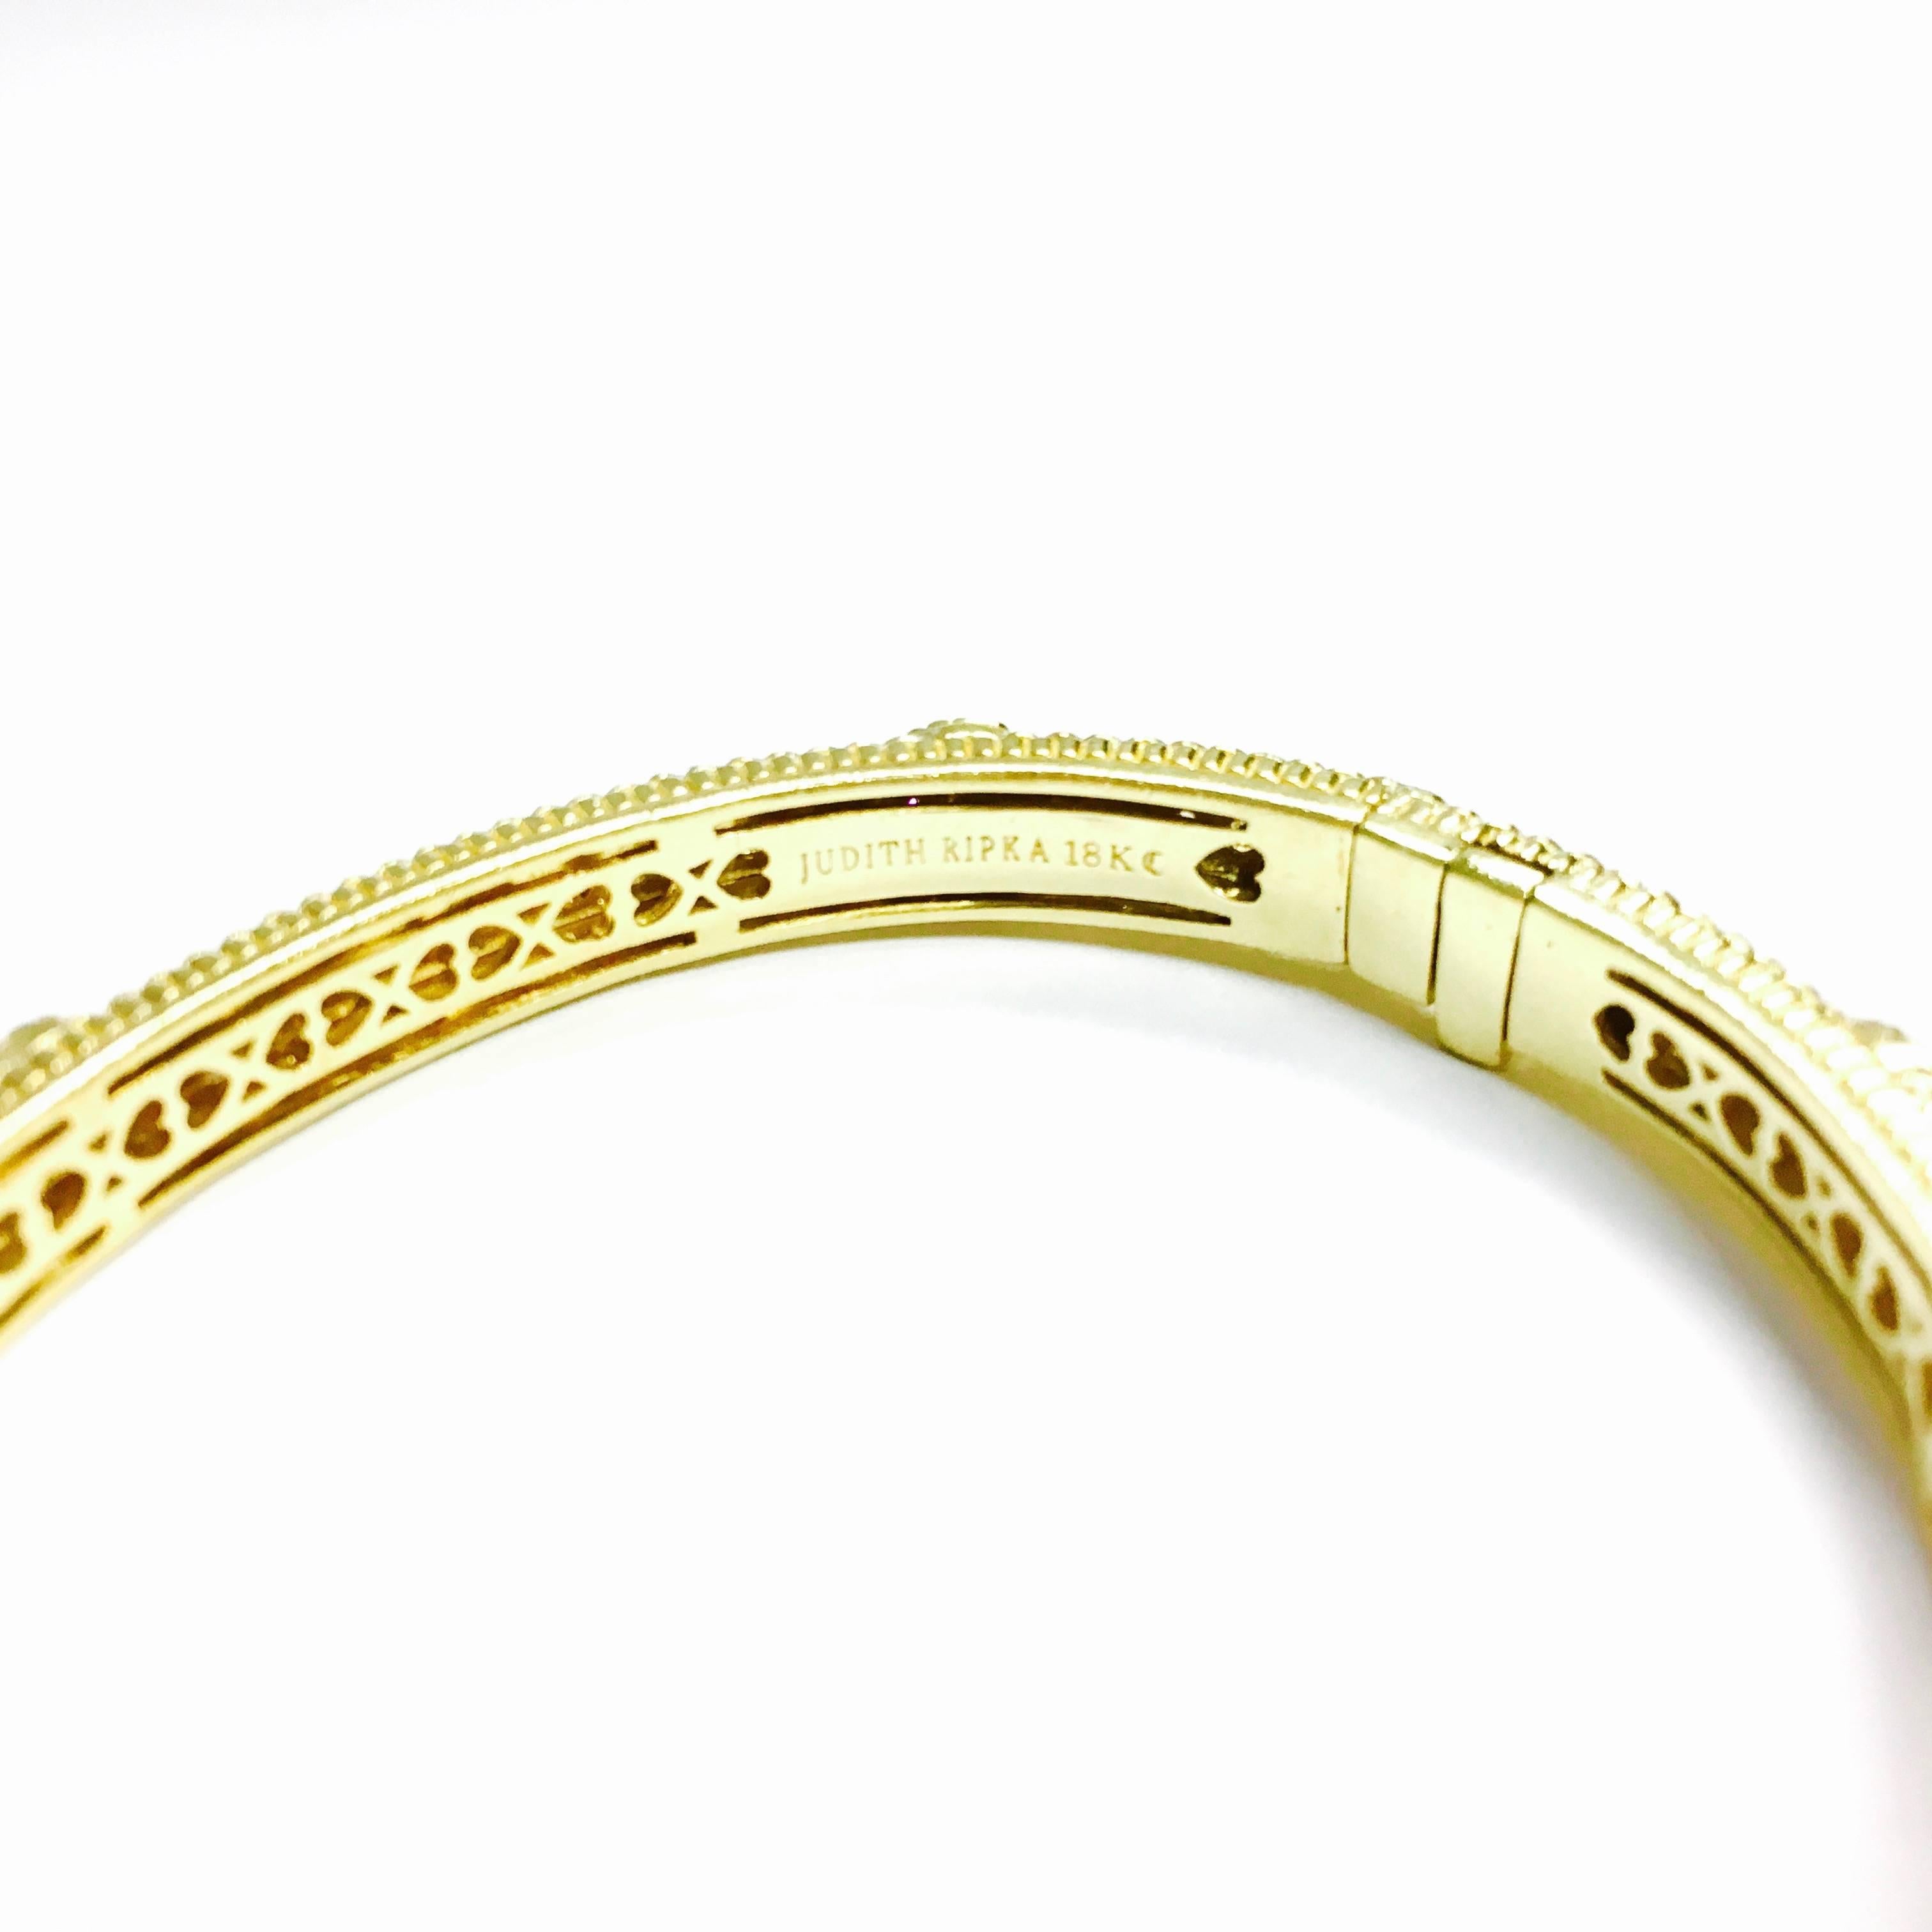 This gorgeous Judith Ripka Couture Collection 'Romance' hinged bangle bracelet offers sparkling 2.00 carats of diamonds set in 18K yellow gold.
Weight: 29 grams 
Measurements:
Inside circumference: 6.5 inches
Bracelet Diameter: 2.25 inches